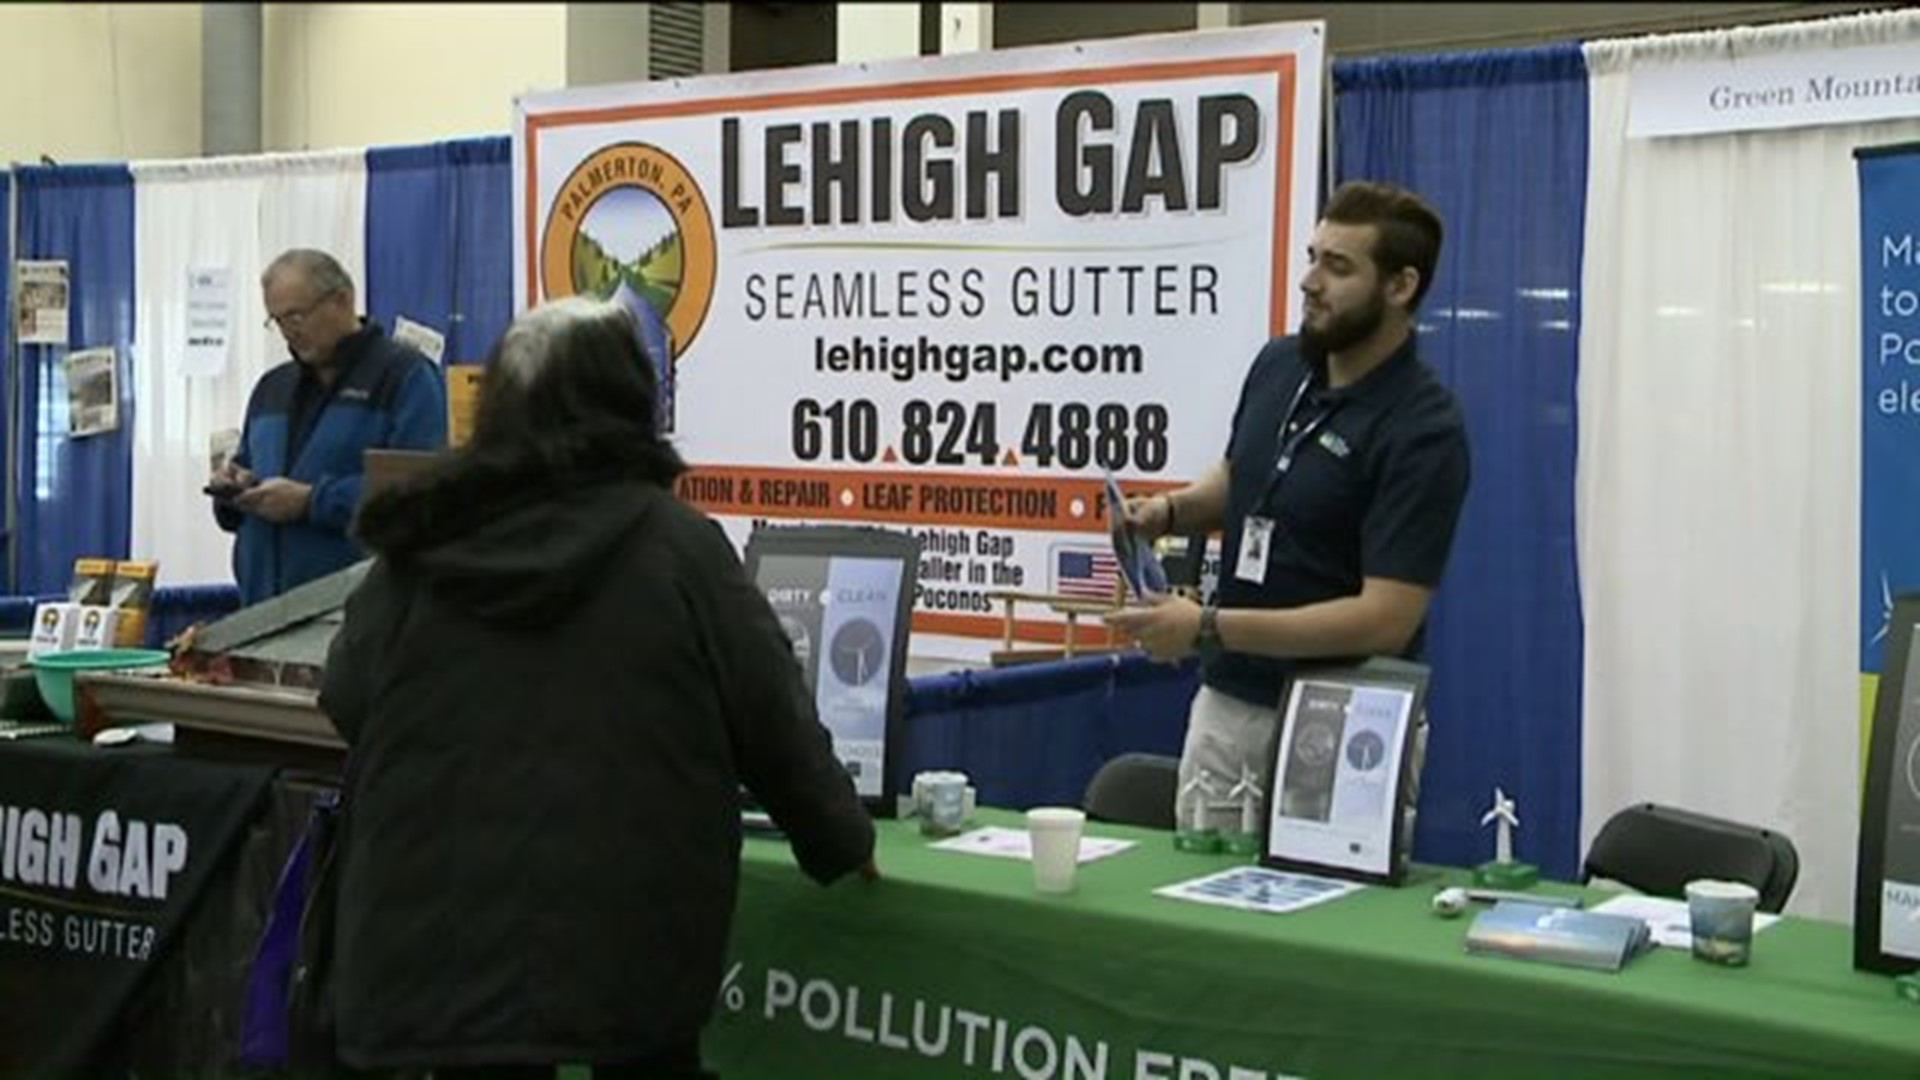 Carbon County Home, Business and Outdoor Expo